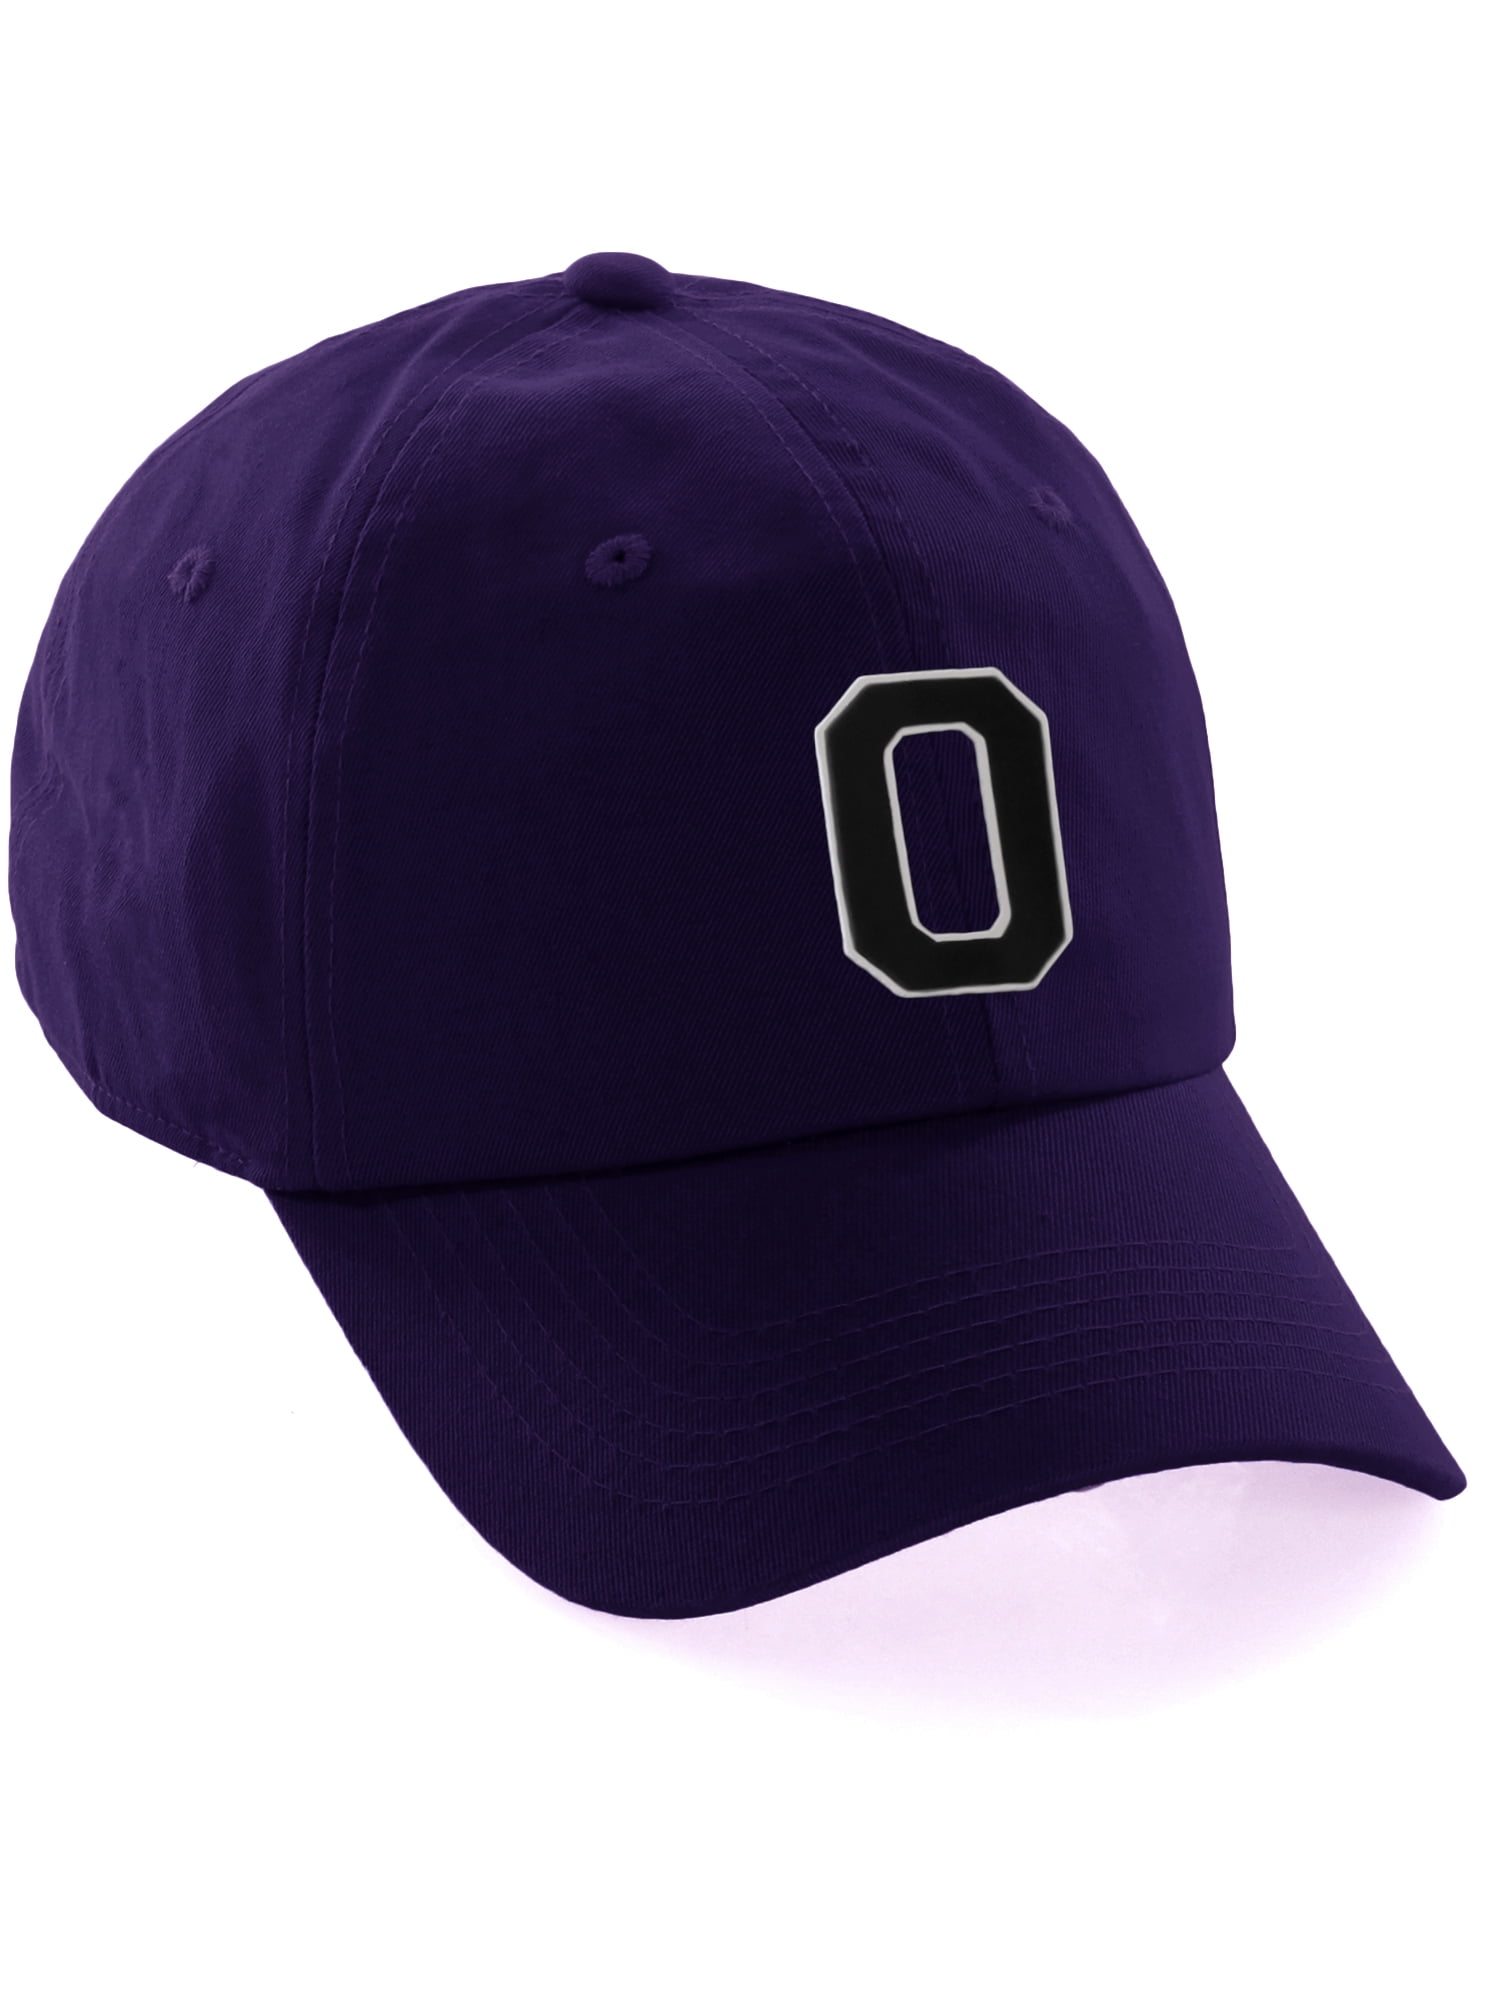 Customized Letter Intial Baseball Hat A to Z Team Colors, Purple Cap White  Gold Letter M 